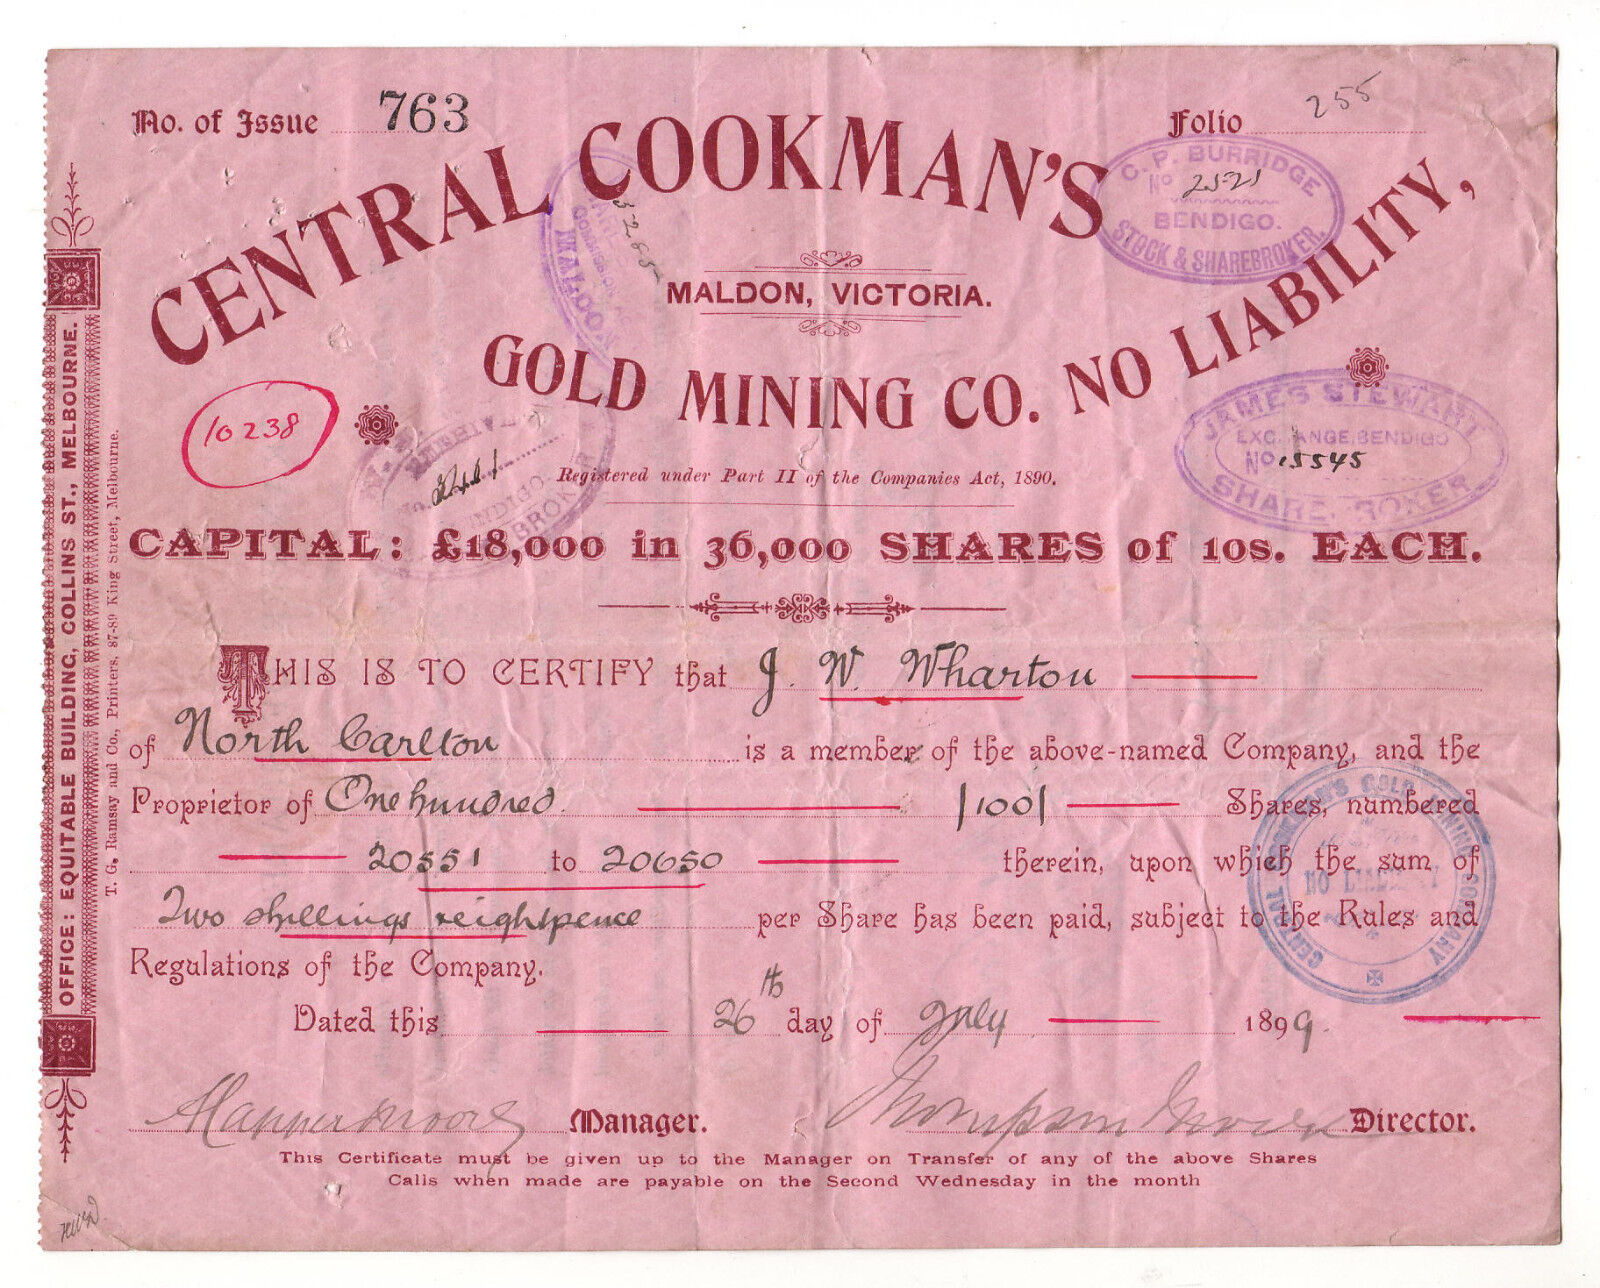 Share Scrip - Mining. 1899 Central Cookman\'s Gold Mining Co - Maldon Vic